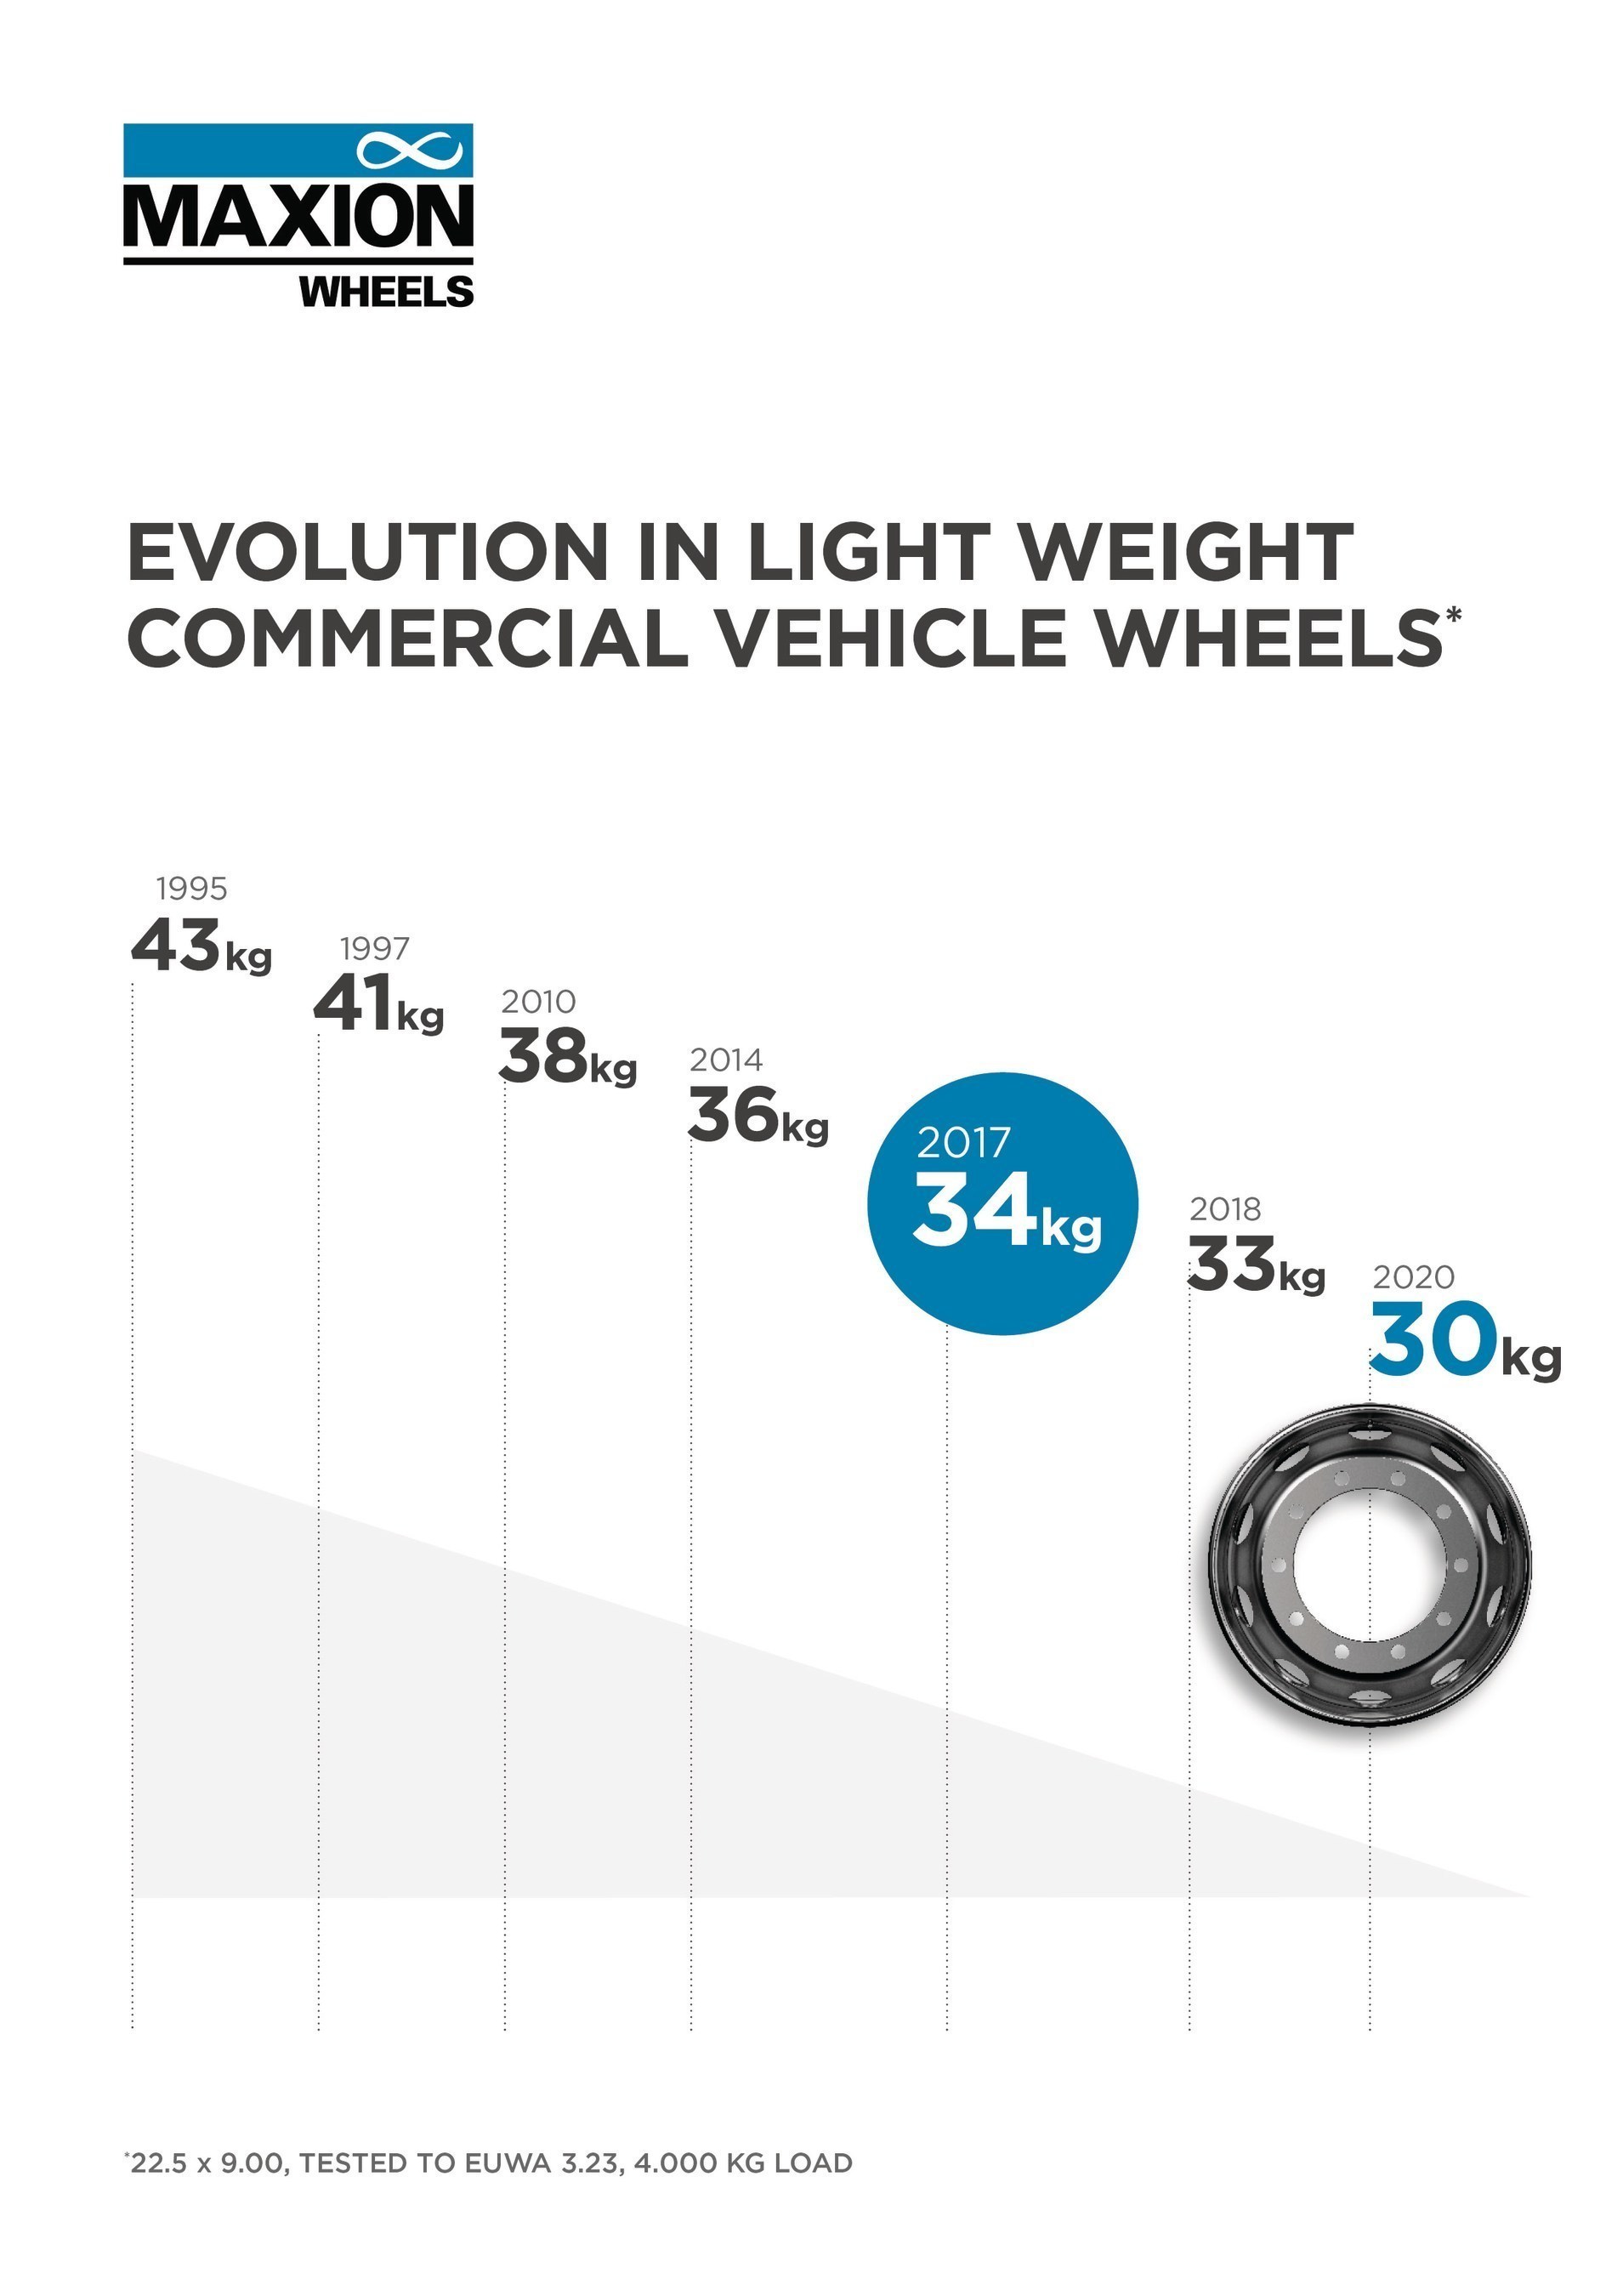 Since 1995, Maxion Wheels has consistently offered vehicle manufacturers the industry's lightest commercial vehicle steel wheel.